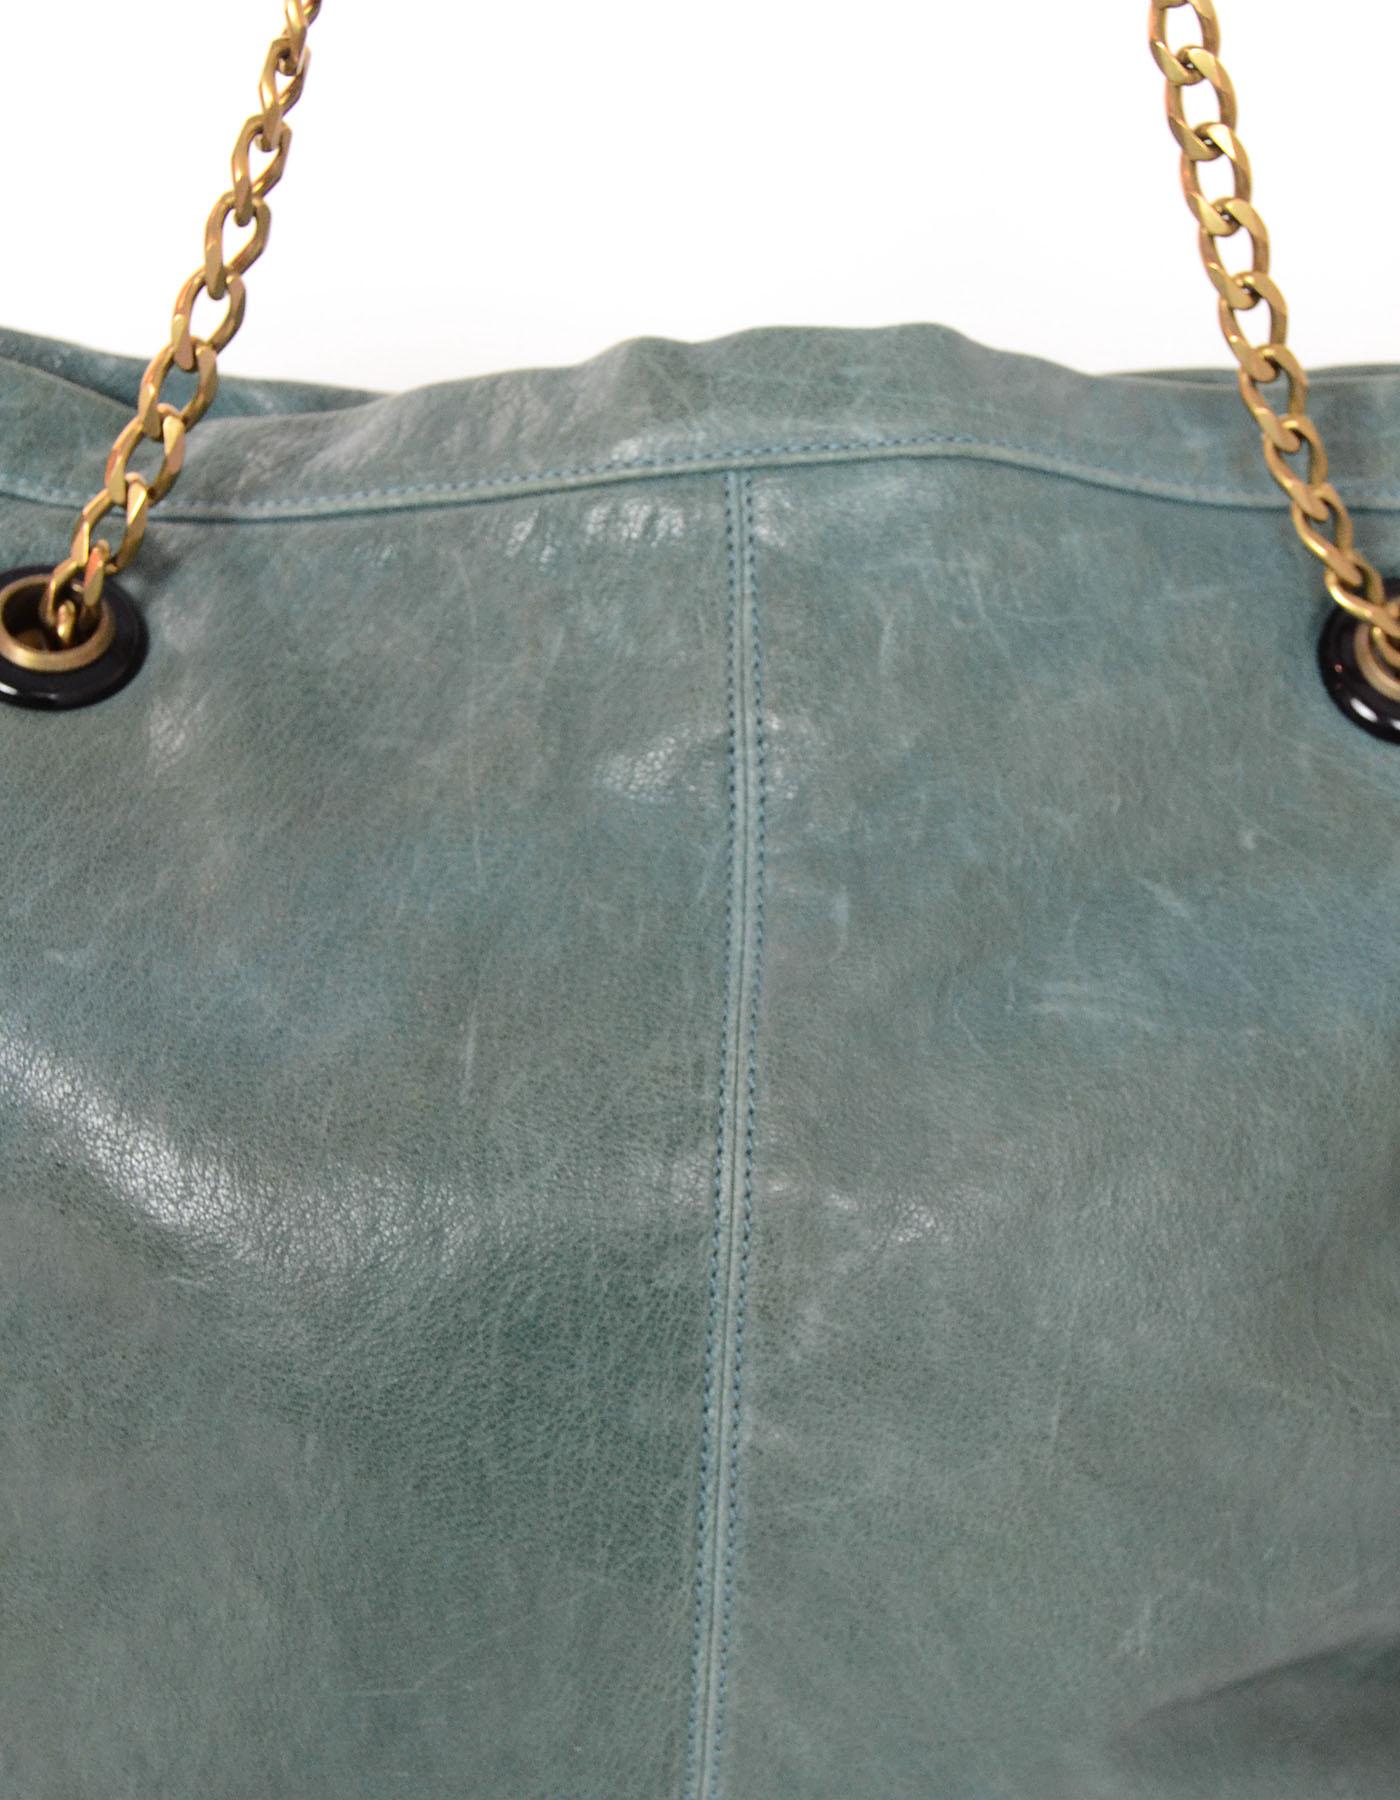 Blue Lanvin Turquoise Distressed Leather Tote Bag w. Dust Bag